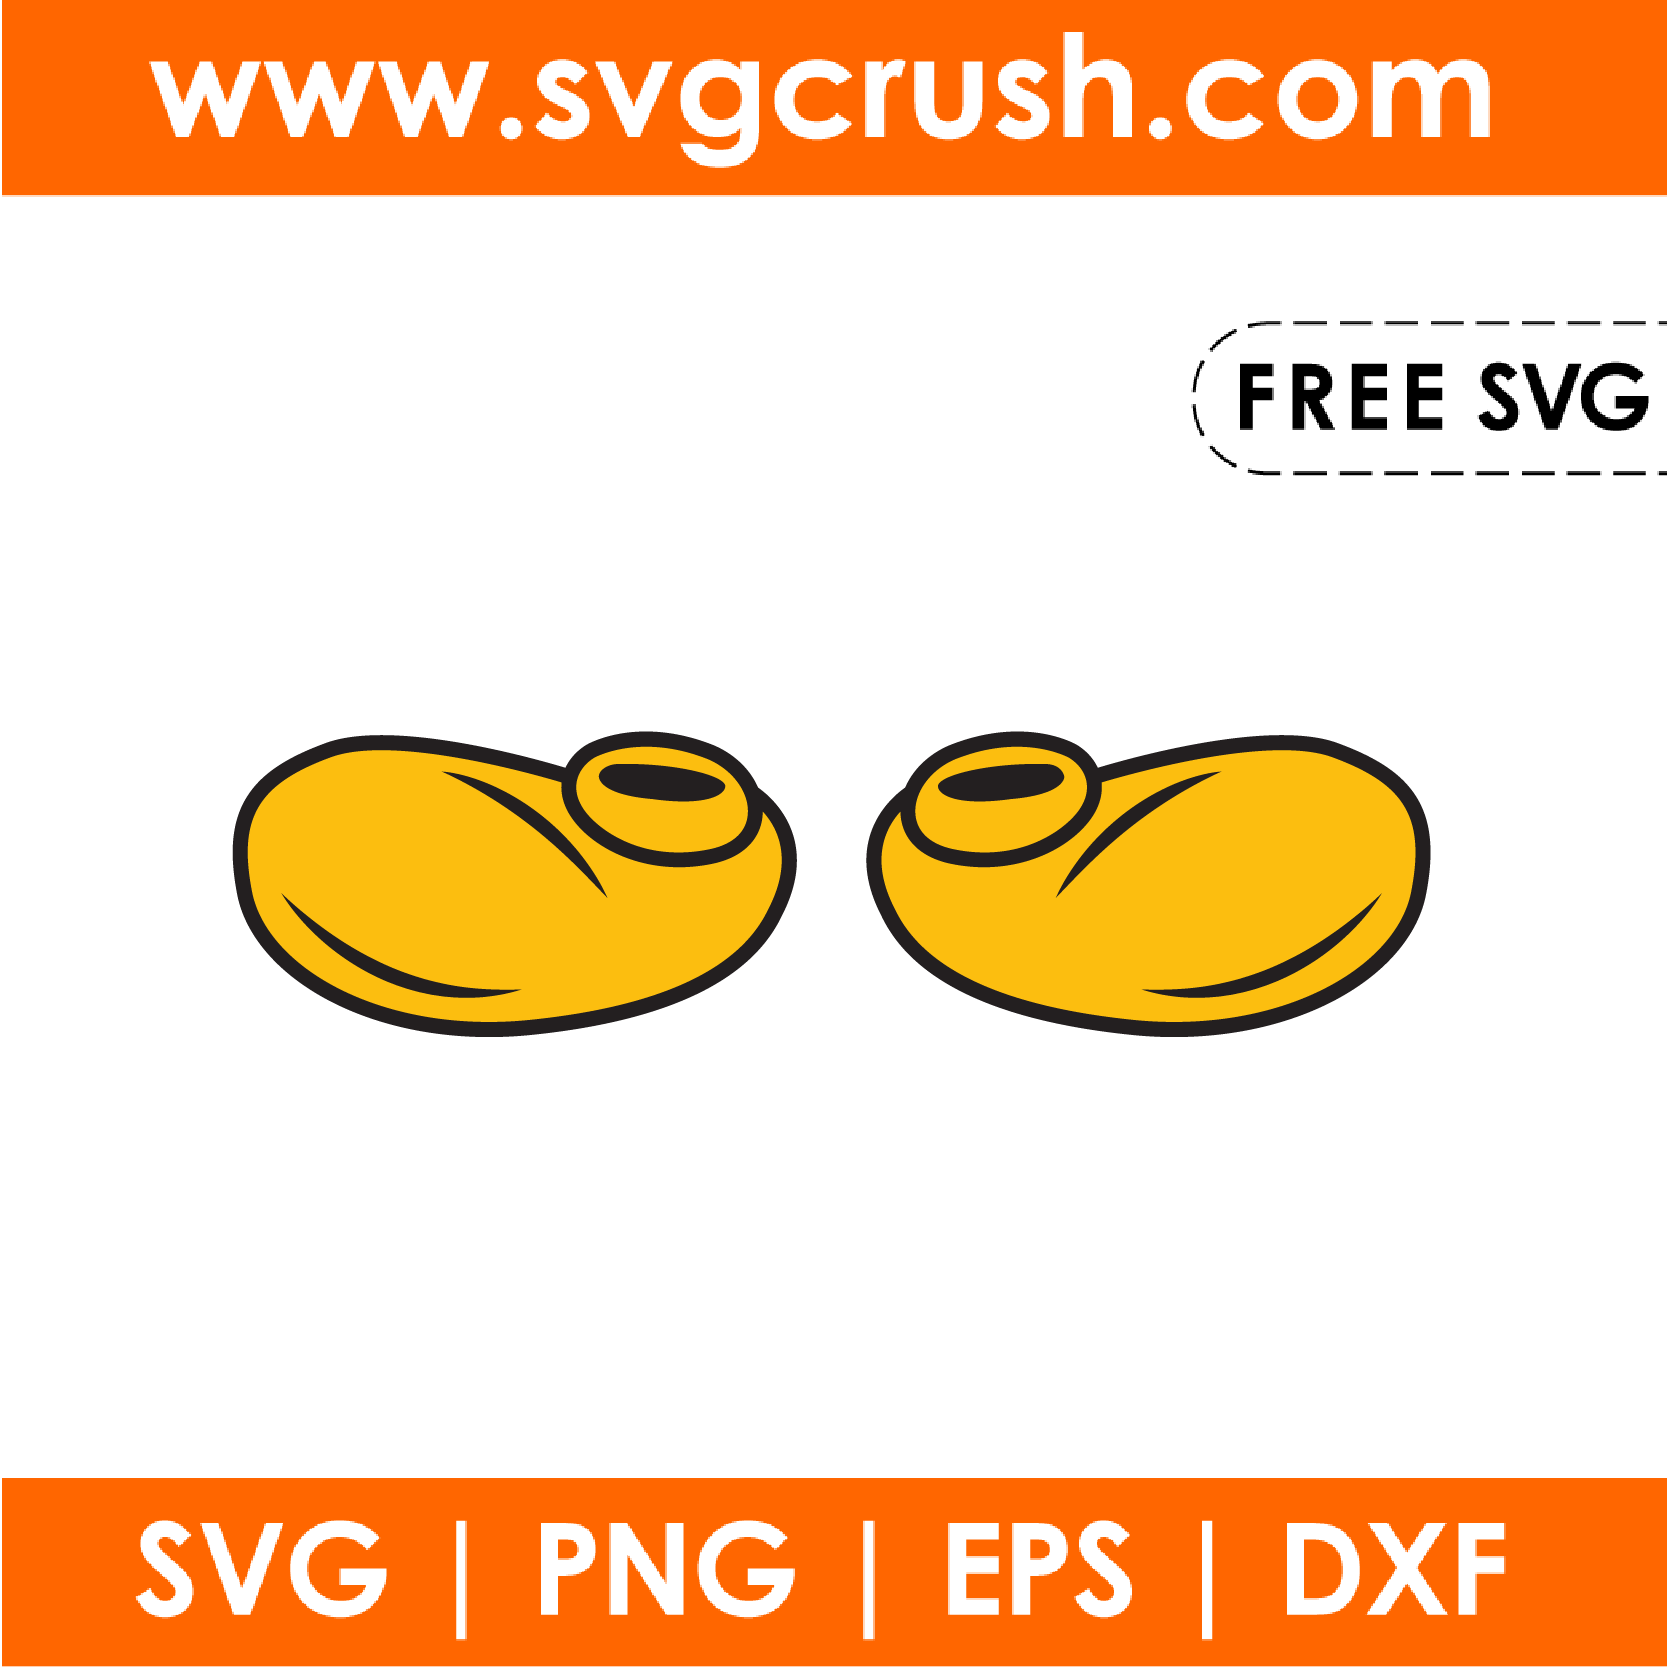 https://www.svgcrush.com/categories/christmas/images/mickey-mouse-shoes-001.png